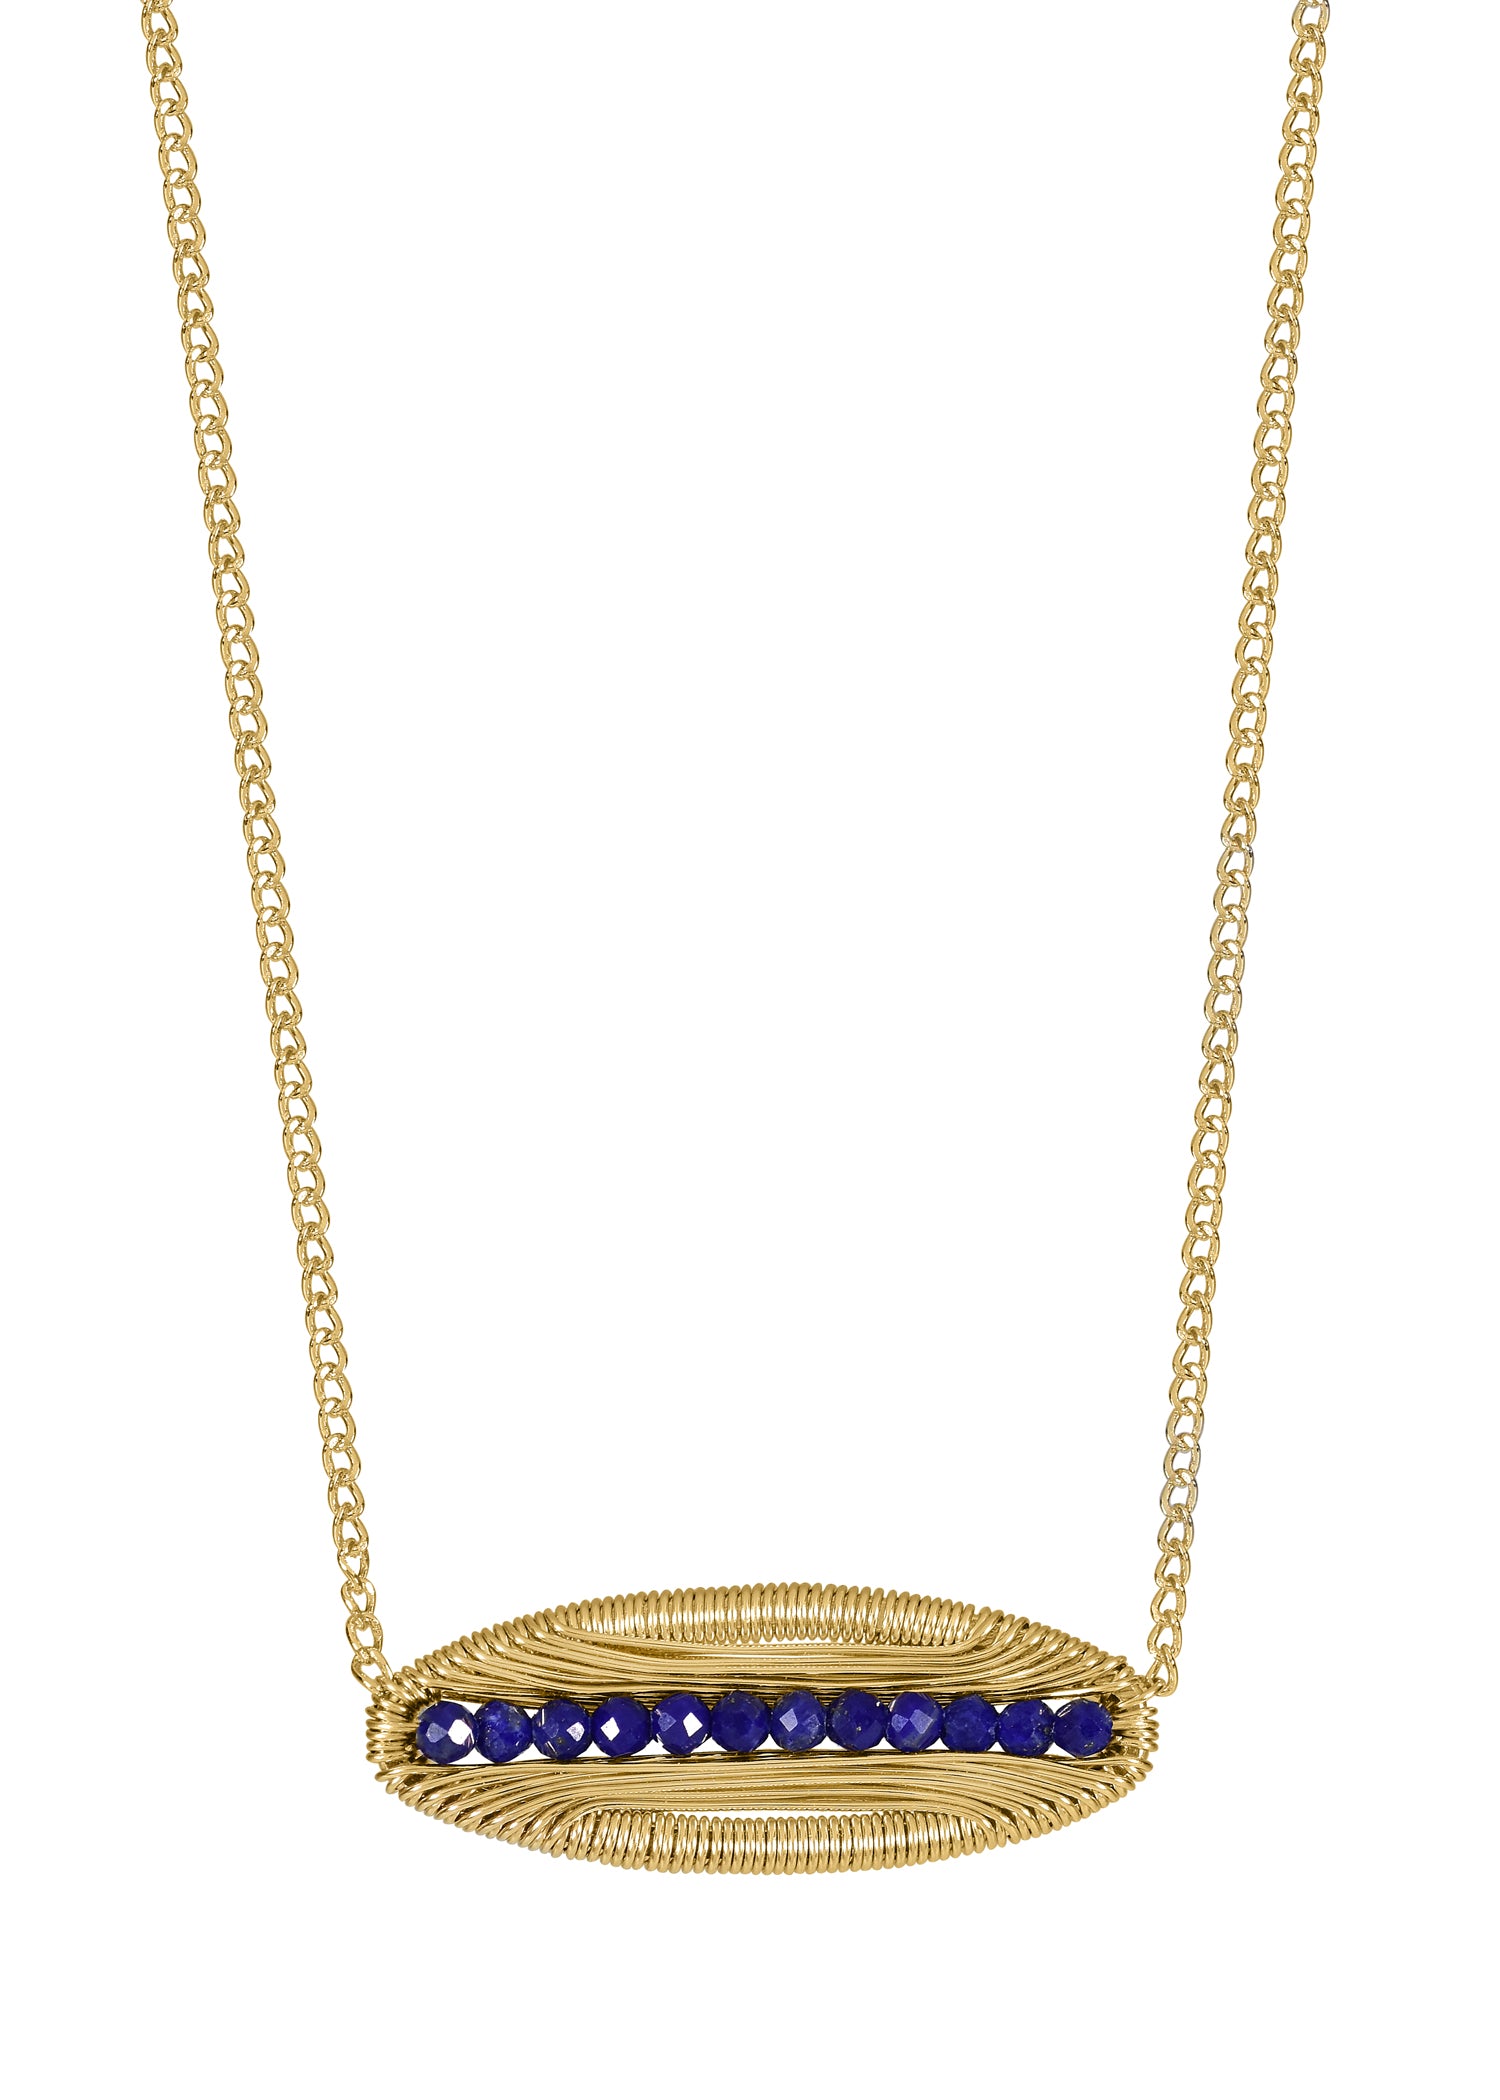 Blue lapis 14k gold fill Necklace measures 16" in length Pendant measures 5/16" in length and 7/8" in width Handmade in our Los Angeles studio